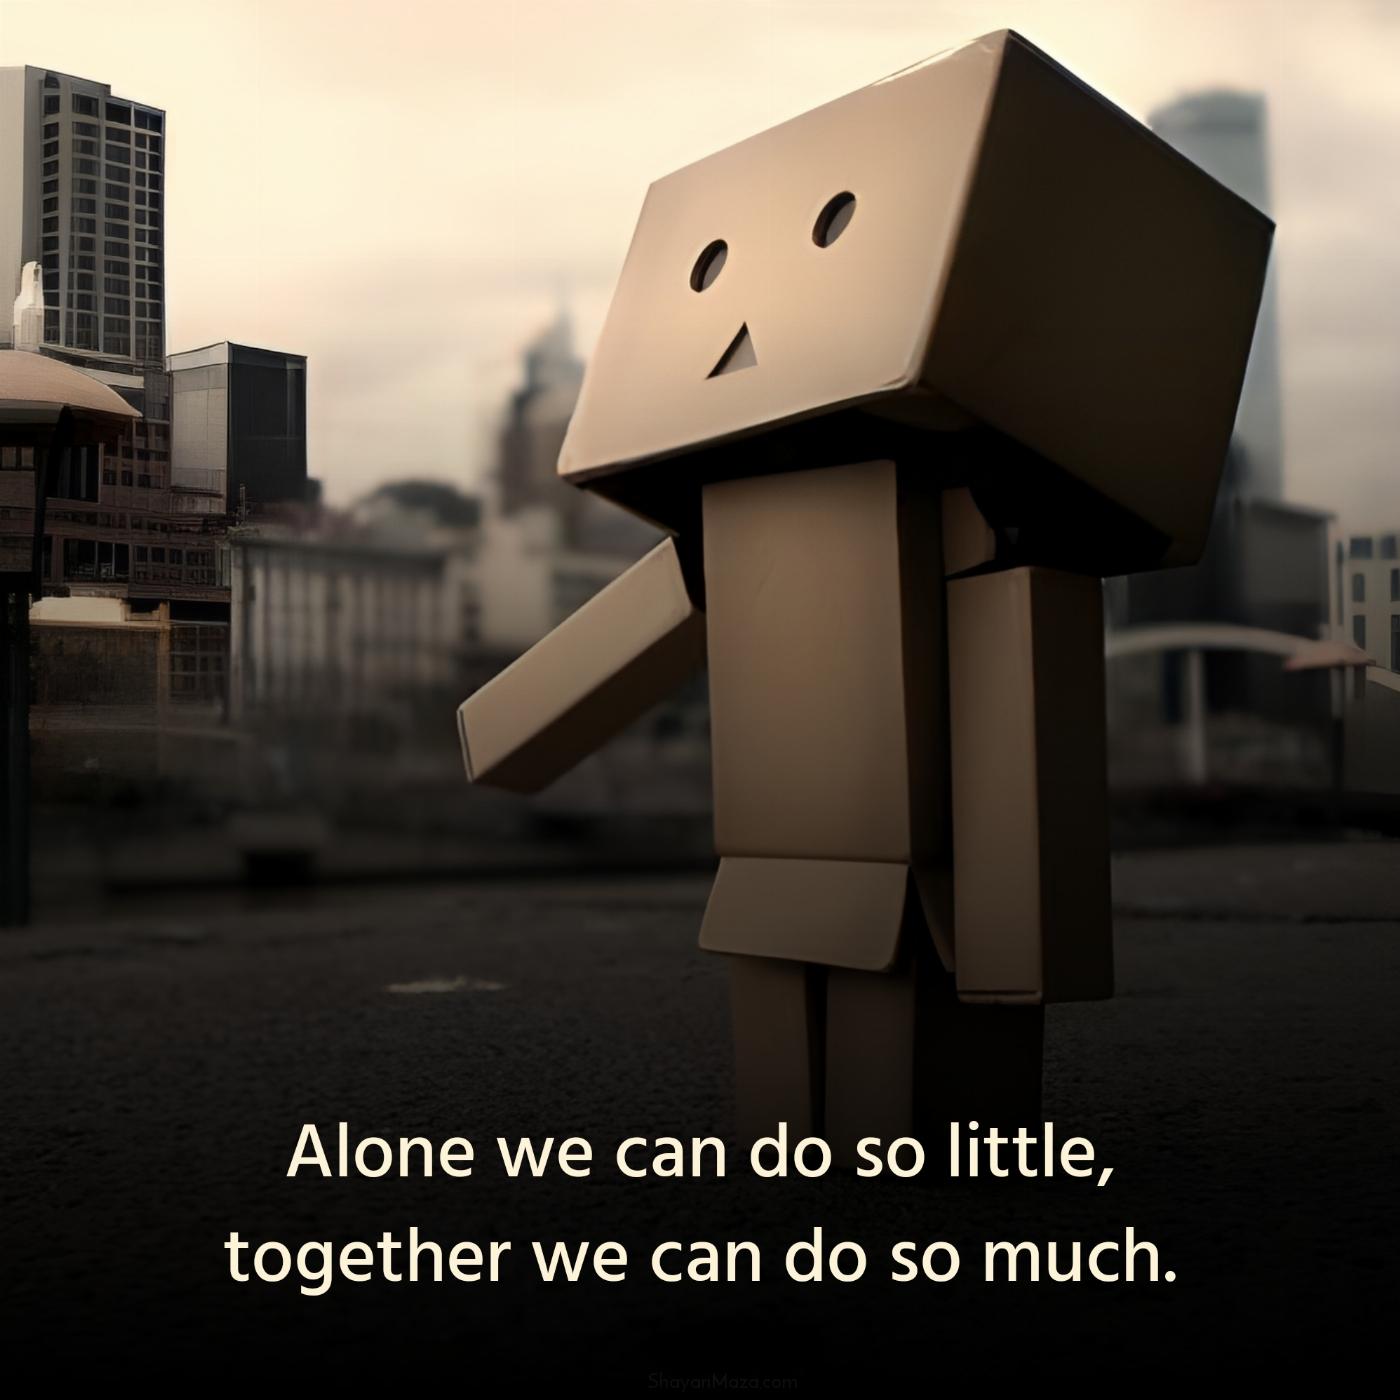 Alone we can do so little together we can do so much